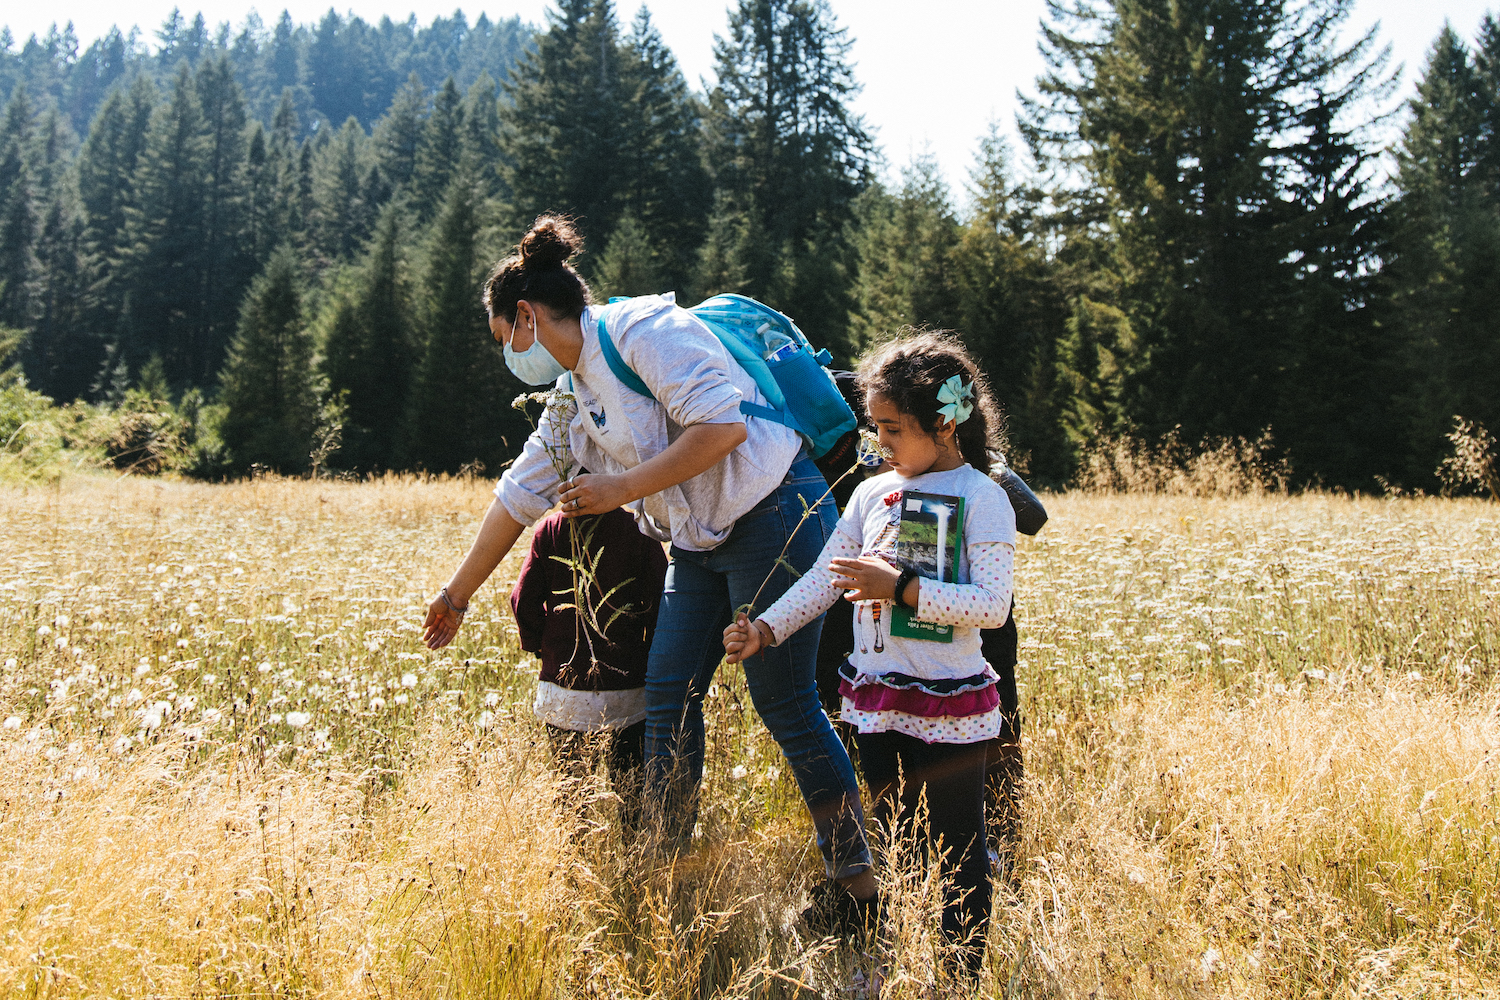 A family explores Silver Falls State Park during a summer learning workshop organized by Capaces Leadership Institute.